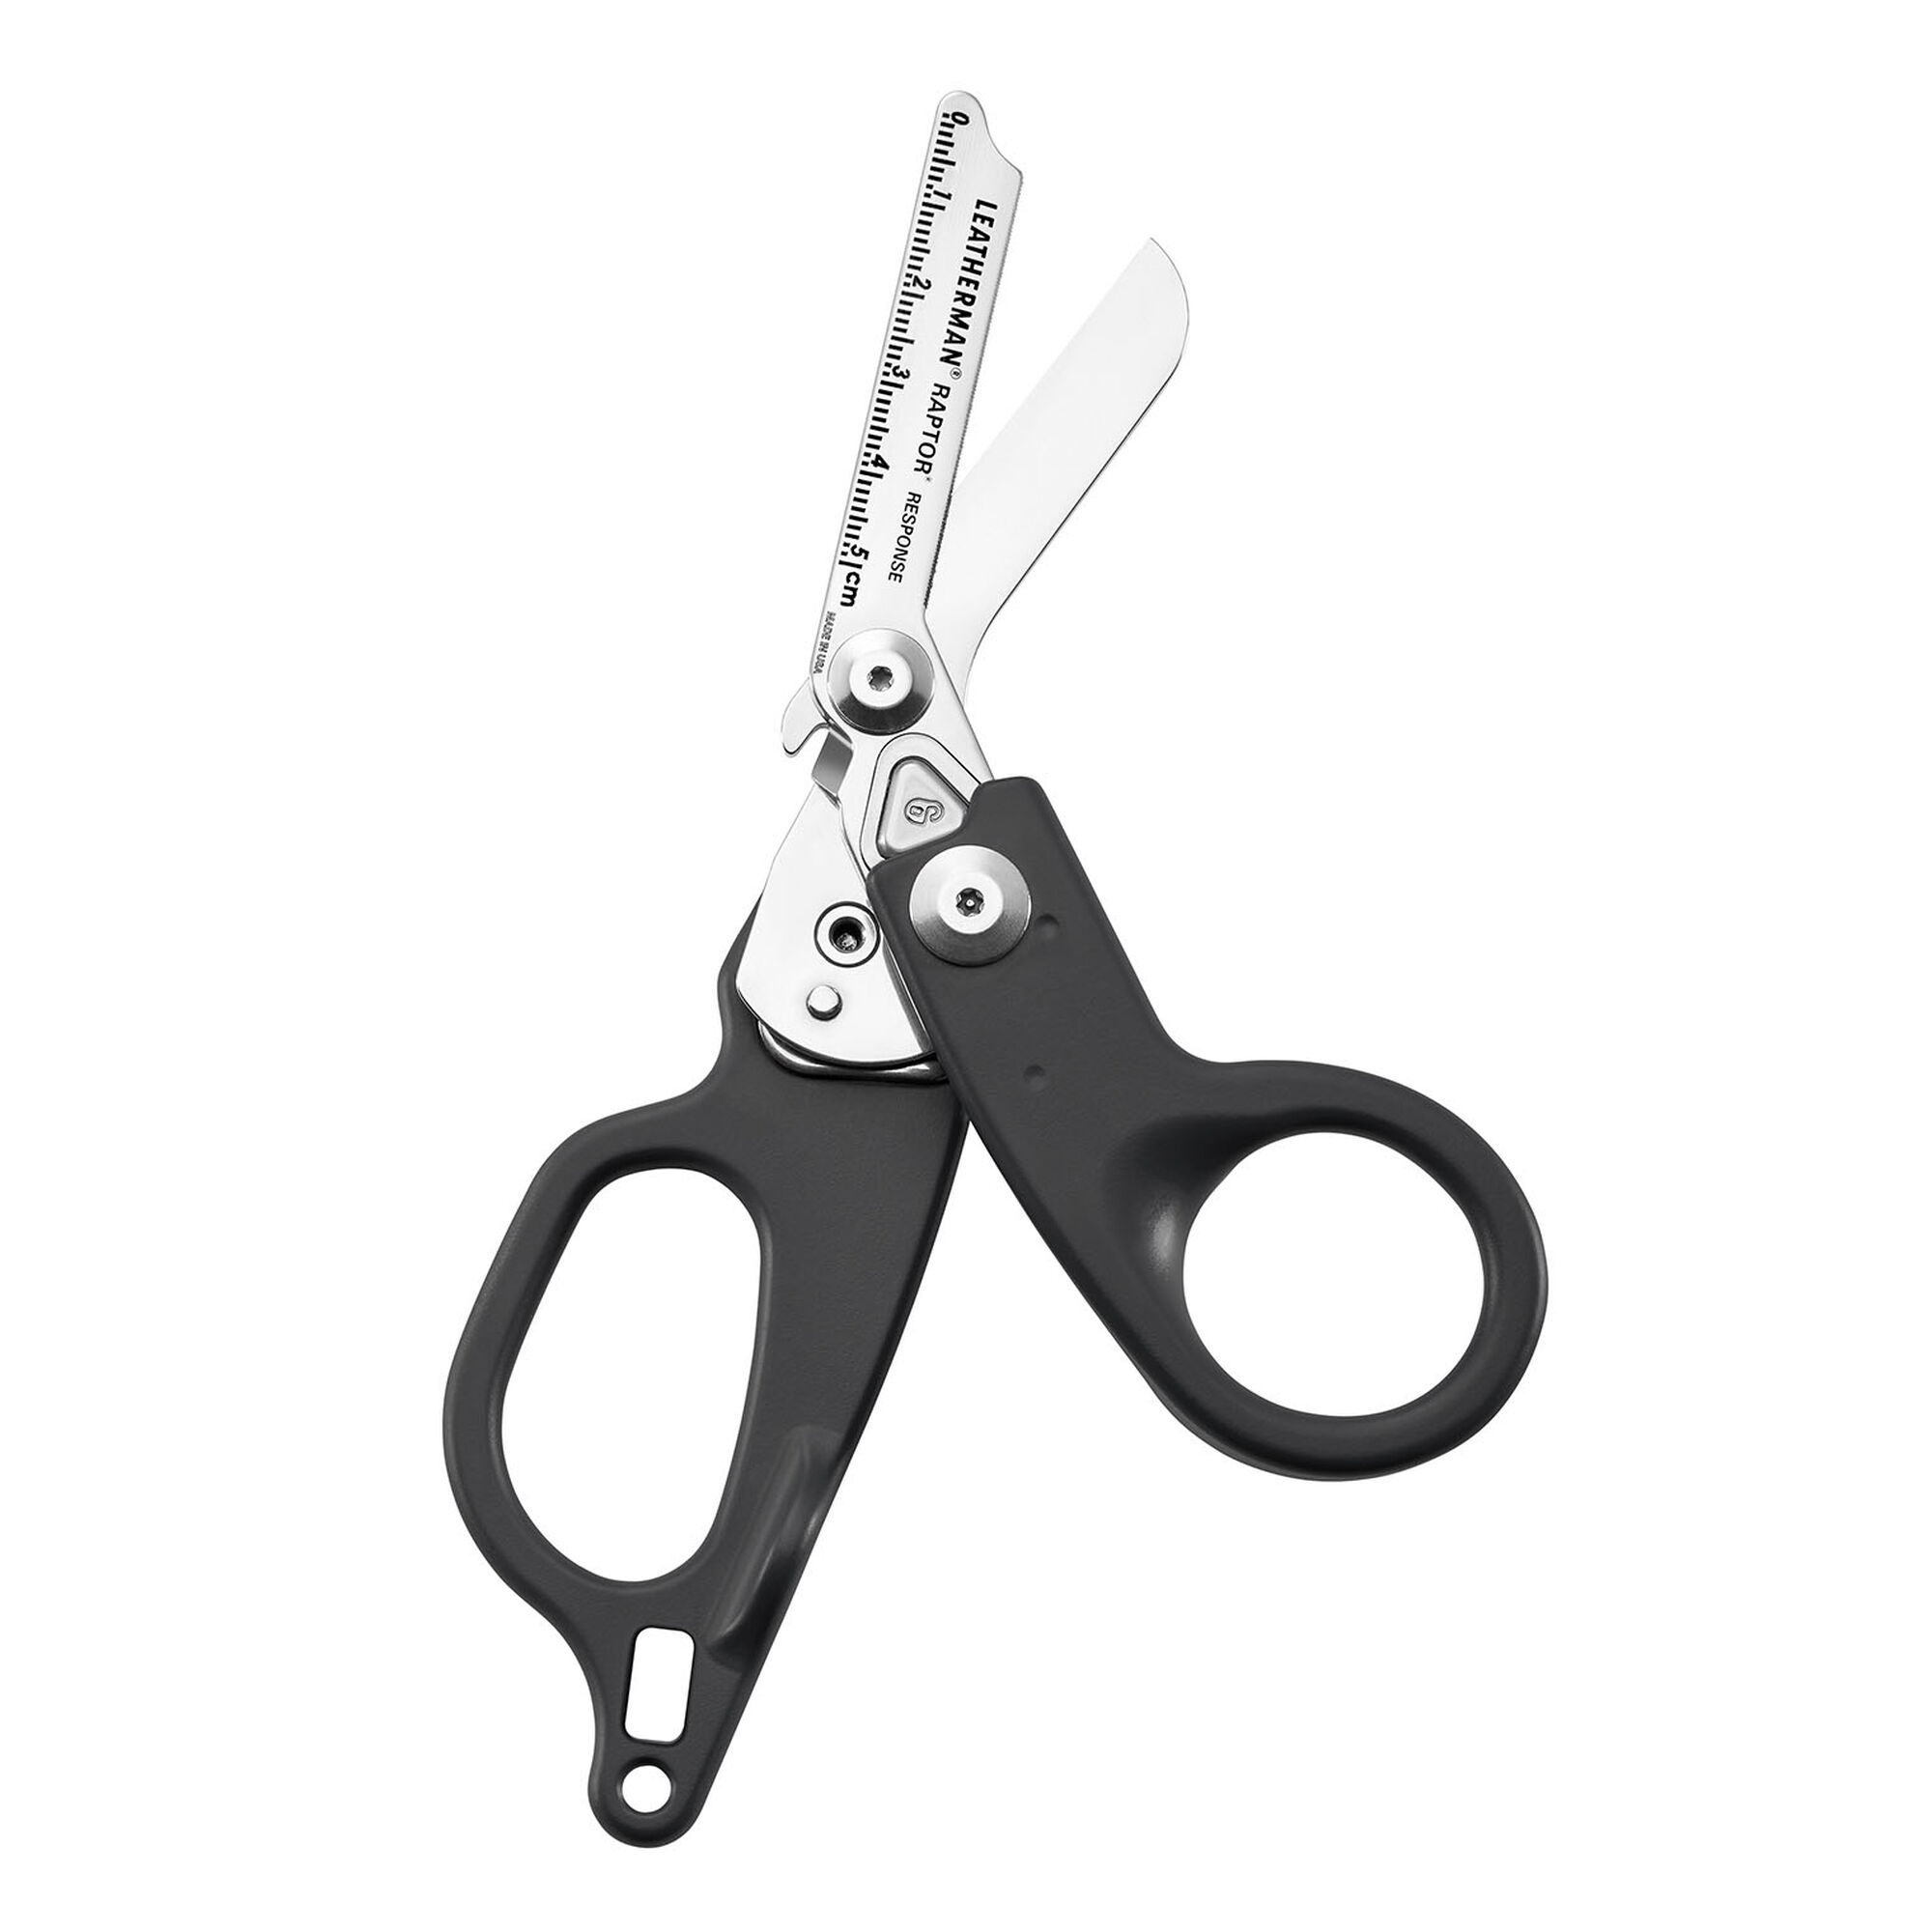 Press Down Scissors, Self-opening Shears & Long Handled Clippers